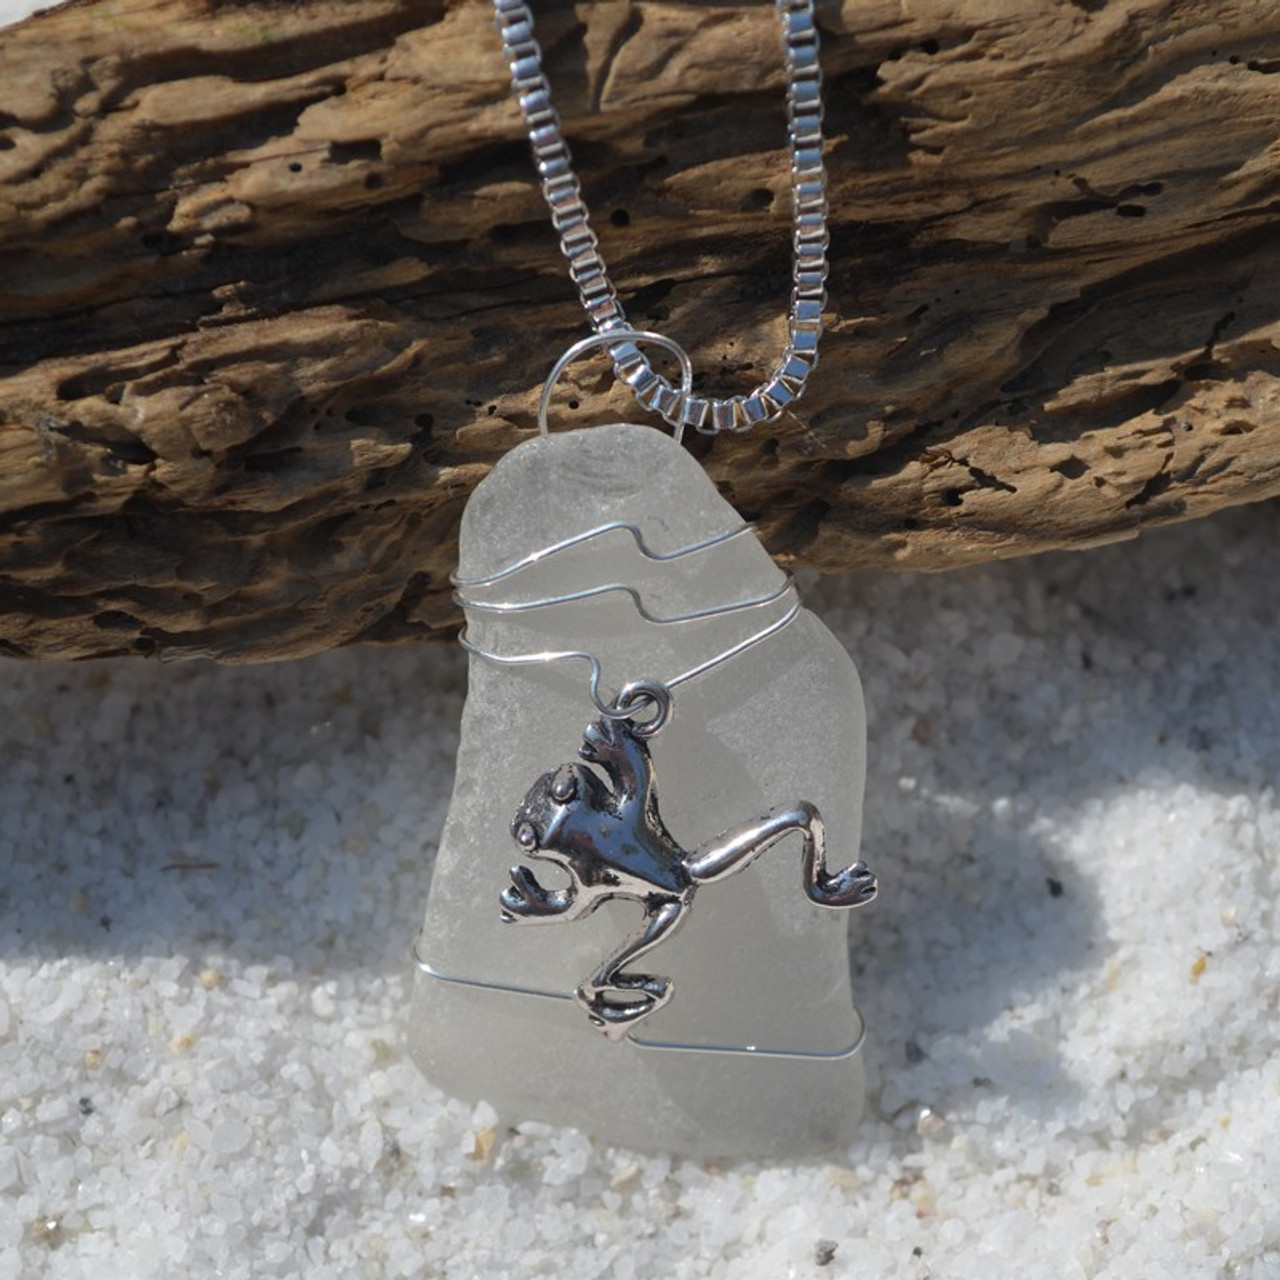 Sea Glass Necklace with a Silver Frog Charm - Choose the Color - Frosted, Green, Brown, or Aqua - Made to Order